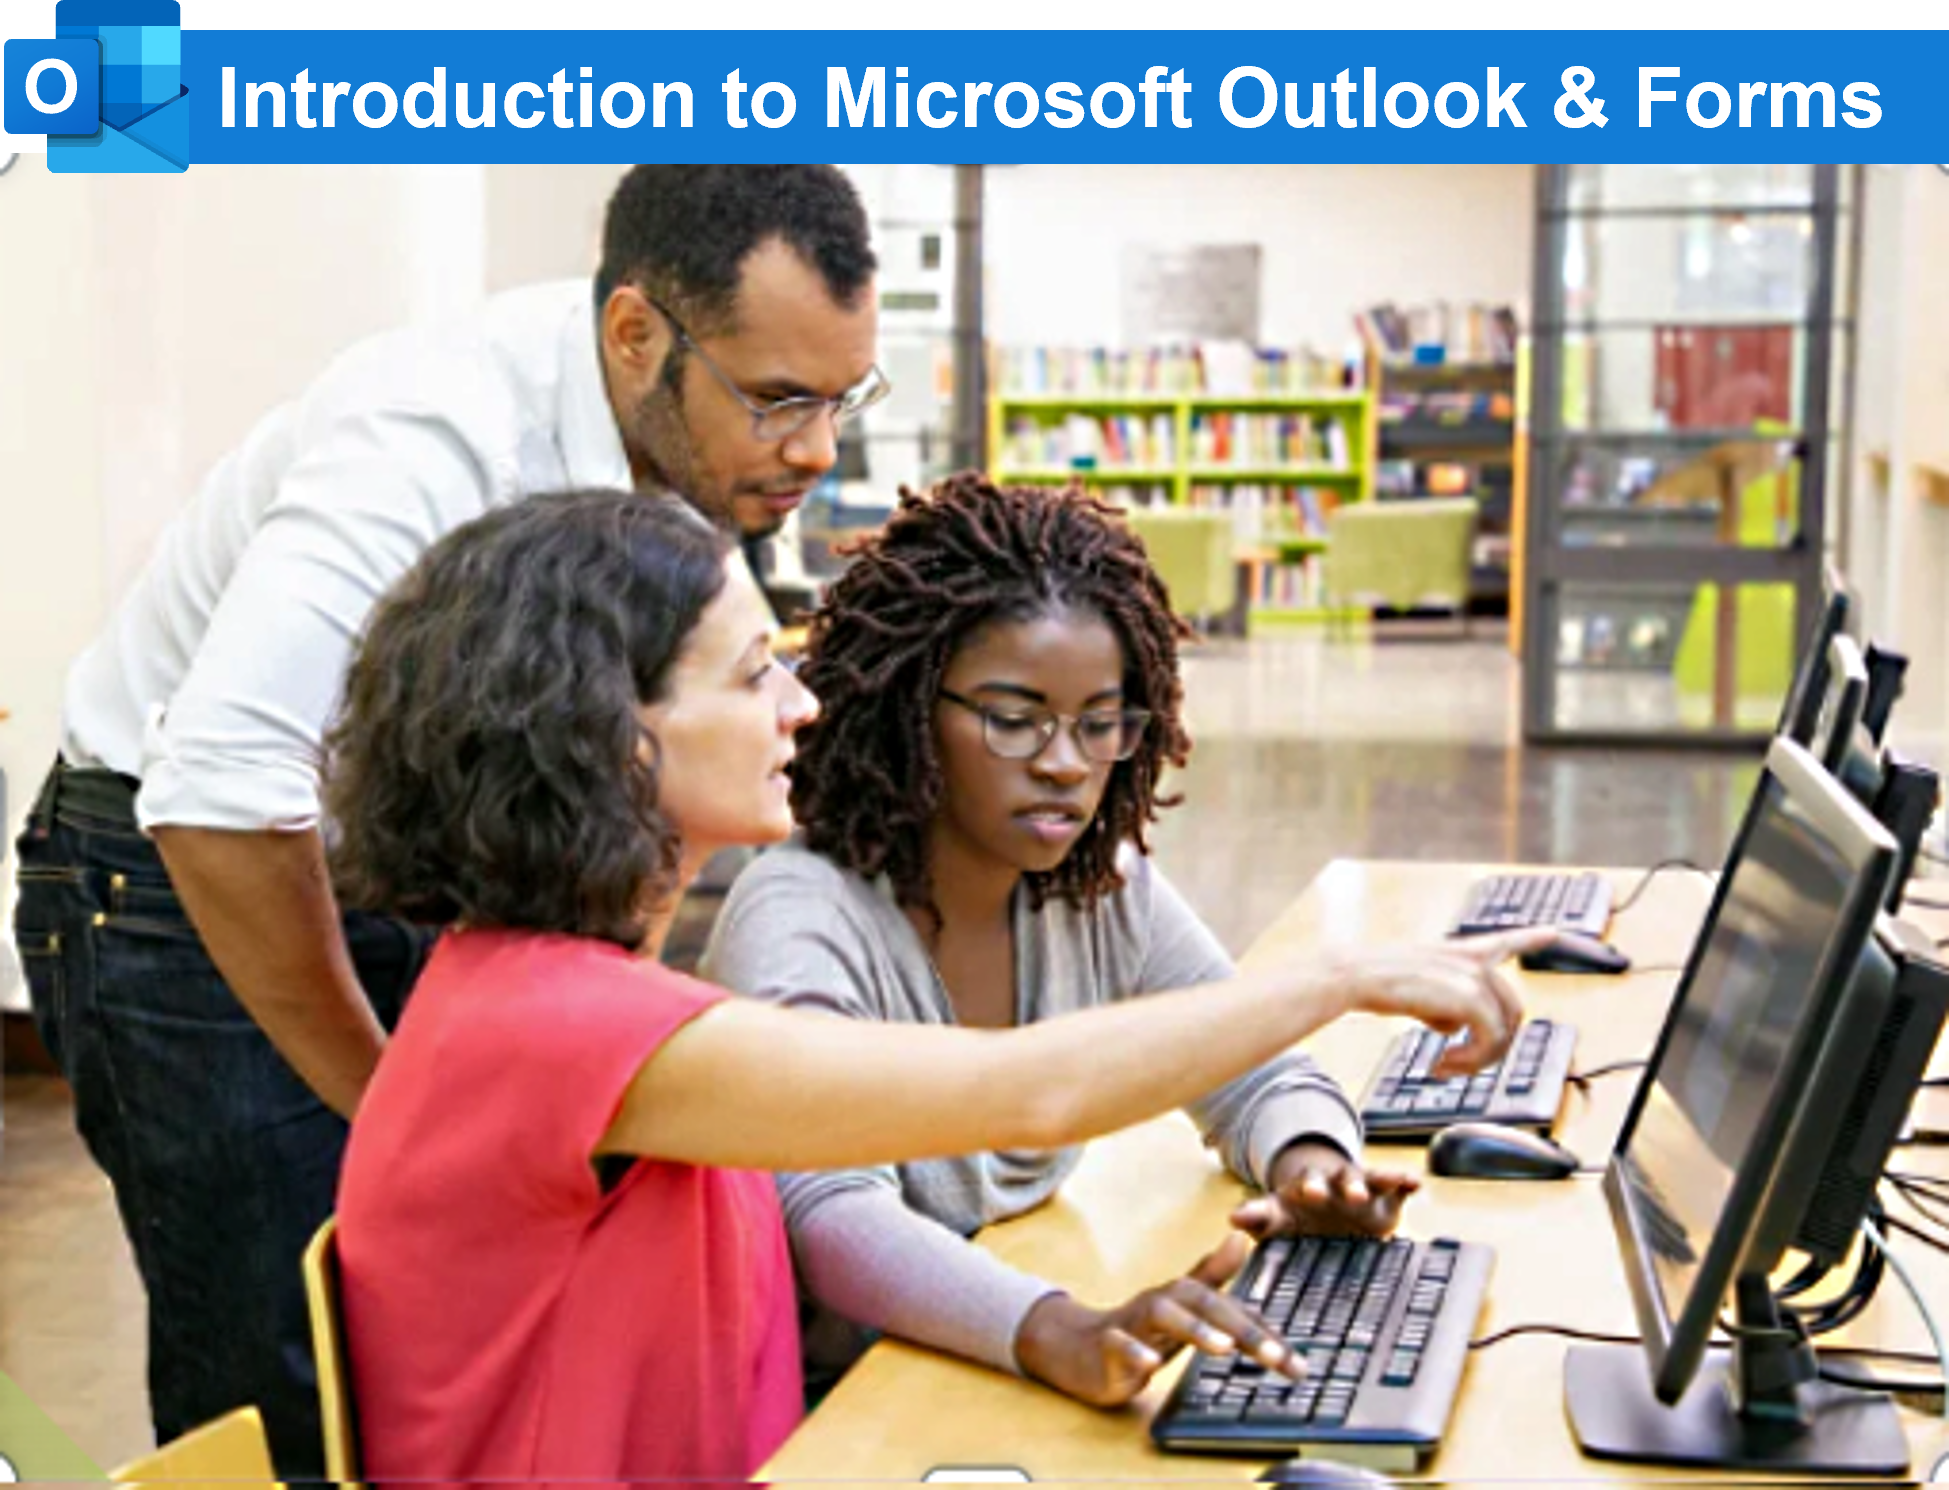 Picture of three people learning together around a computer. There is a line of text above reading Introduction to Microsoft Outlook & Forms